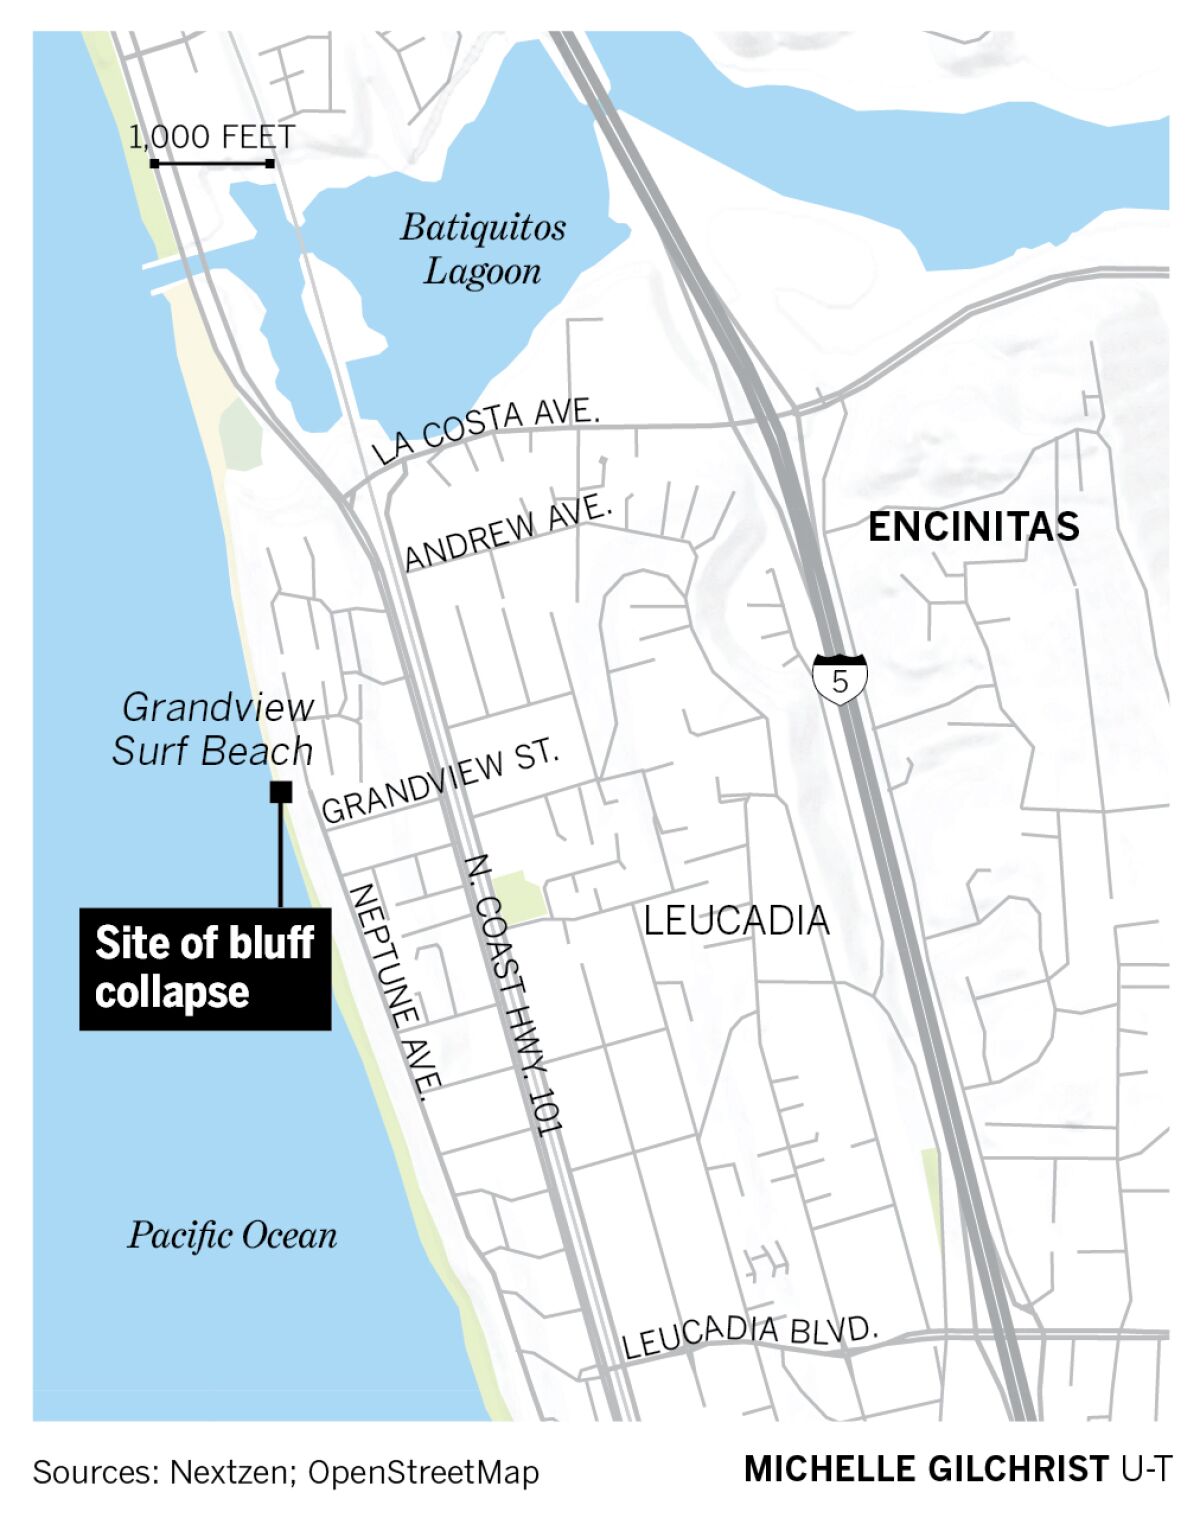 Site of bluff collapse in Leucadia